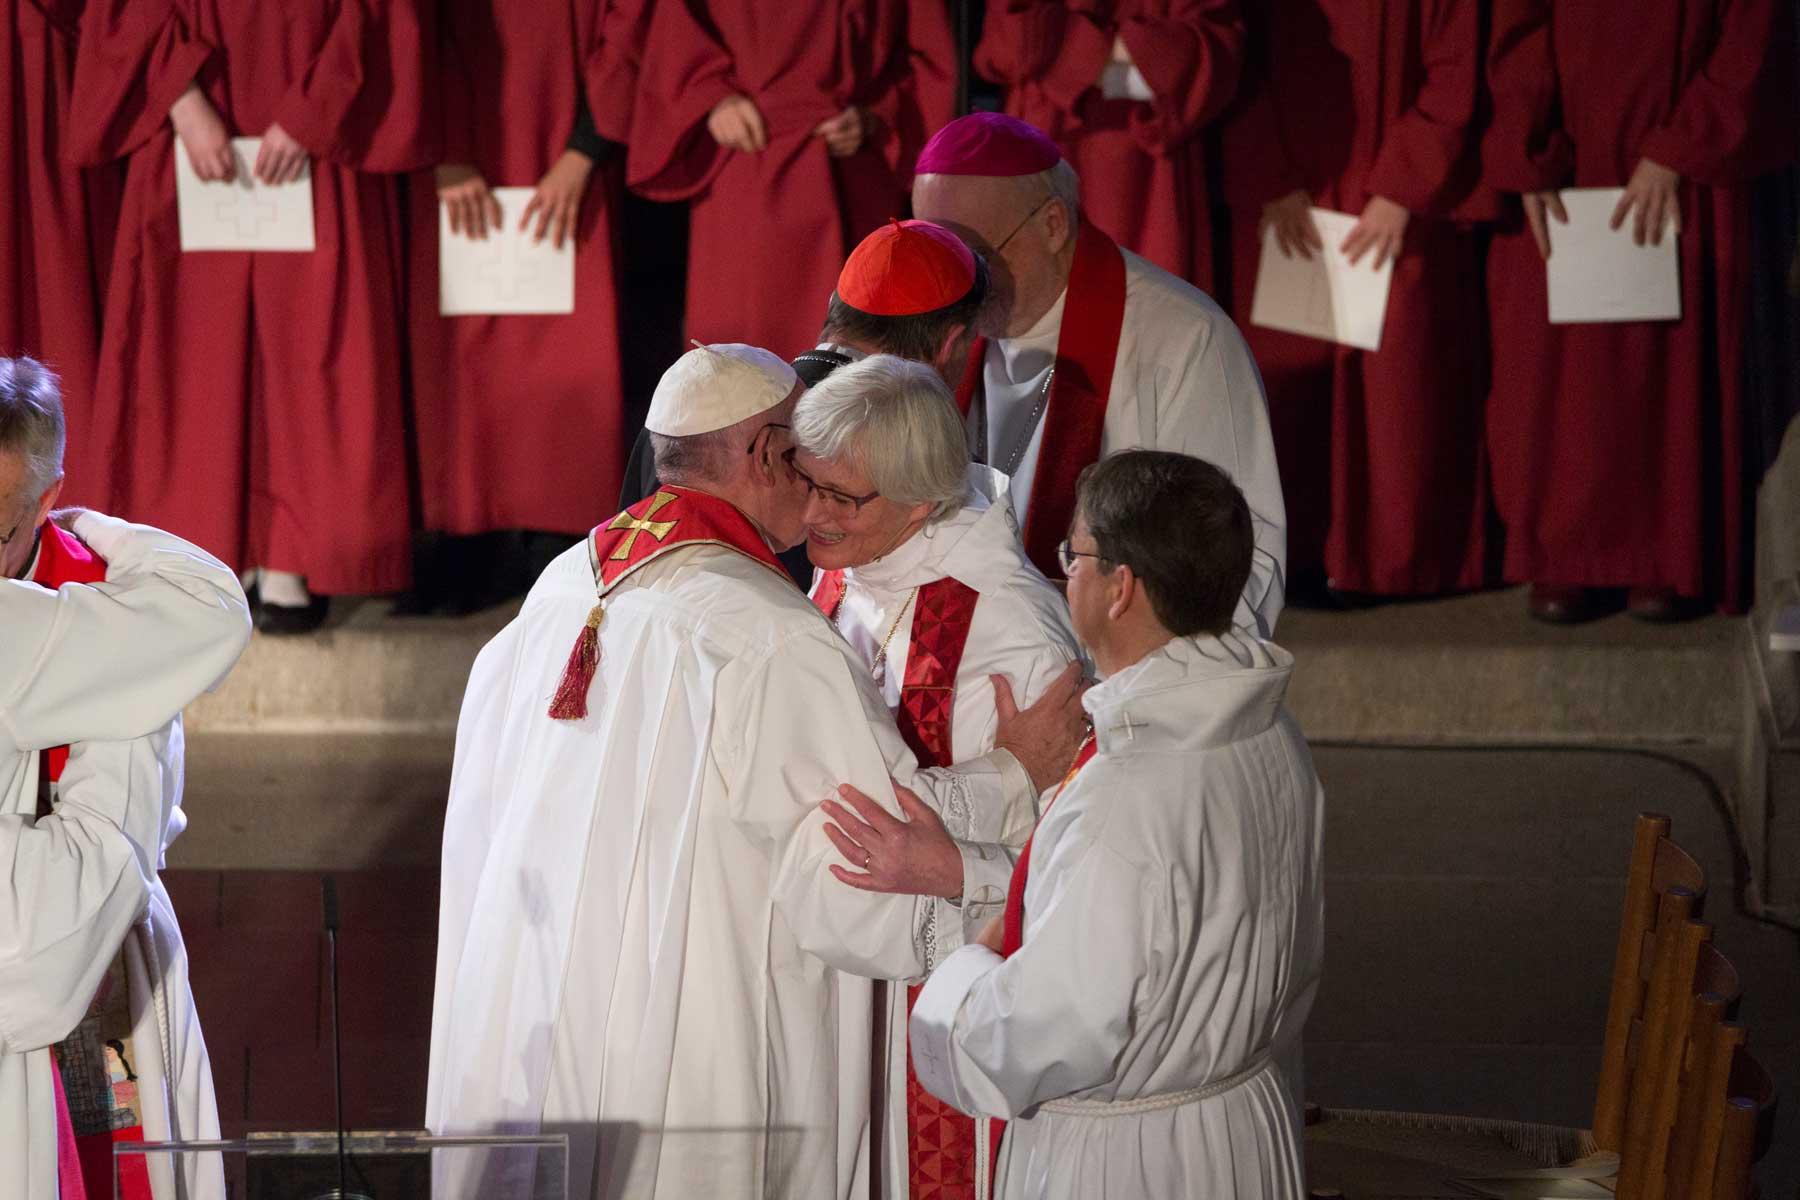 Archbishop Jackelén and Pope Francis embrace during the joint commemoration of the Reformation in Lund Cathedral. Photo M. Ringlander/Church of Sweden